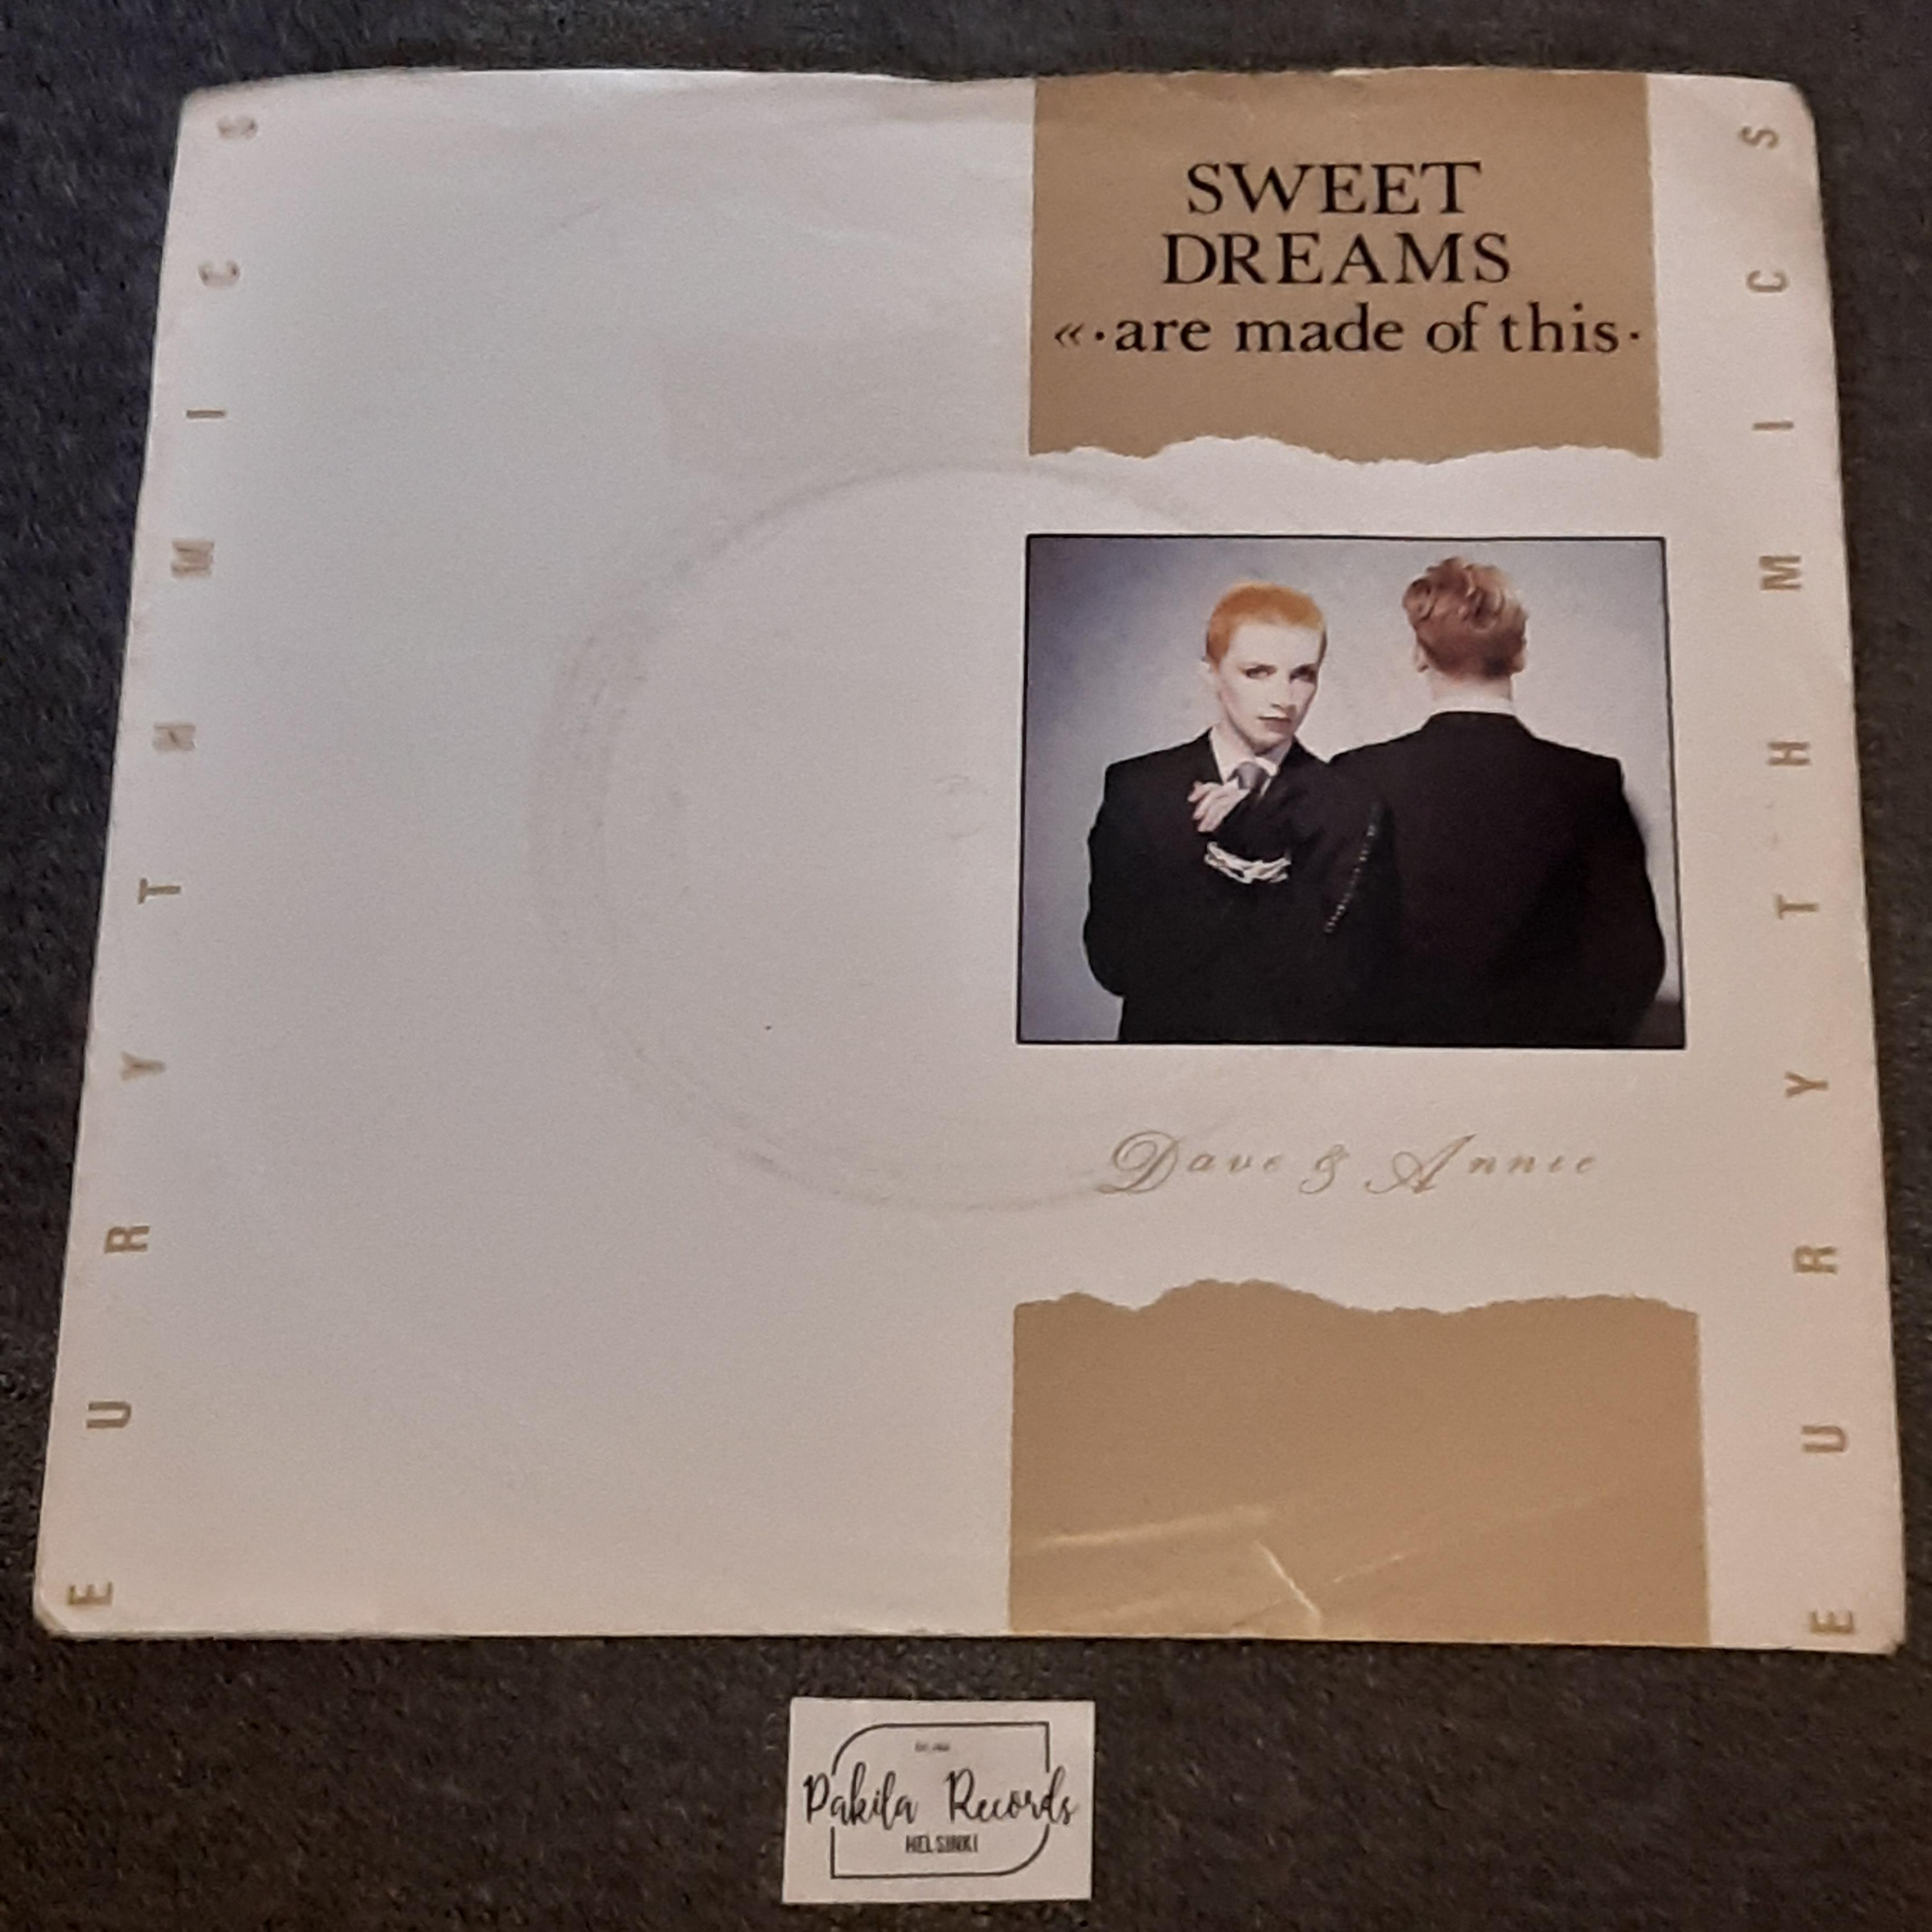 Eurythmics - Sweet Dreams (Are Made Of This) - Single 7" (käytetty)